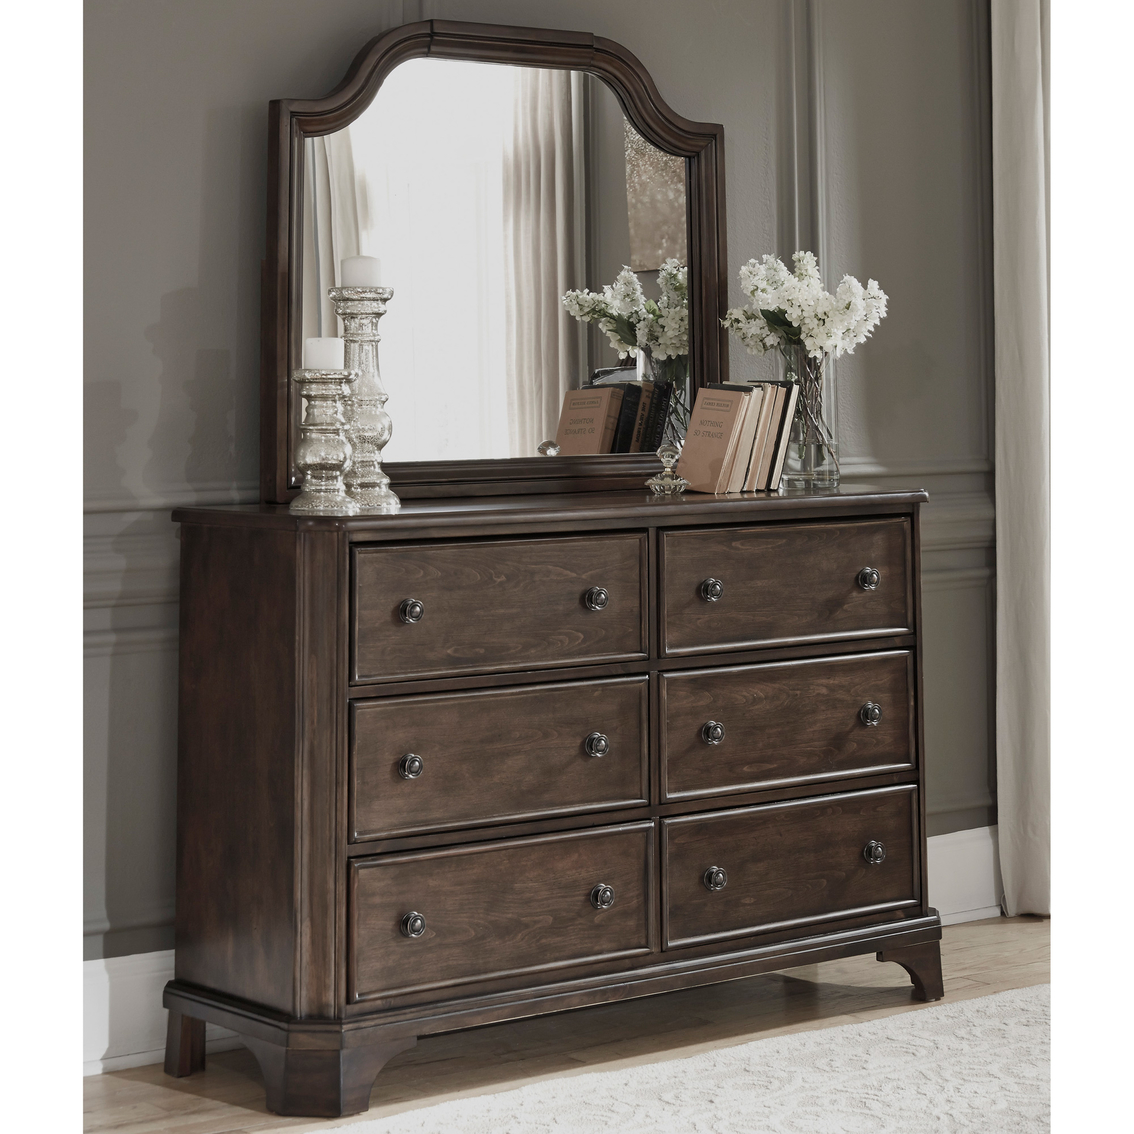 Signature Design by Ashley Adinton 6 Drawer Dresser and Mirror Set - Image 2 of 3